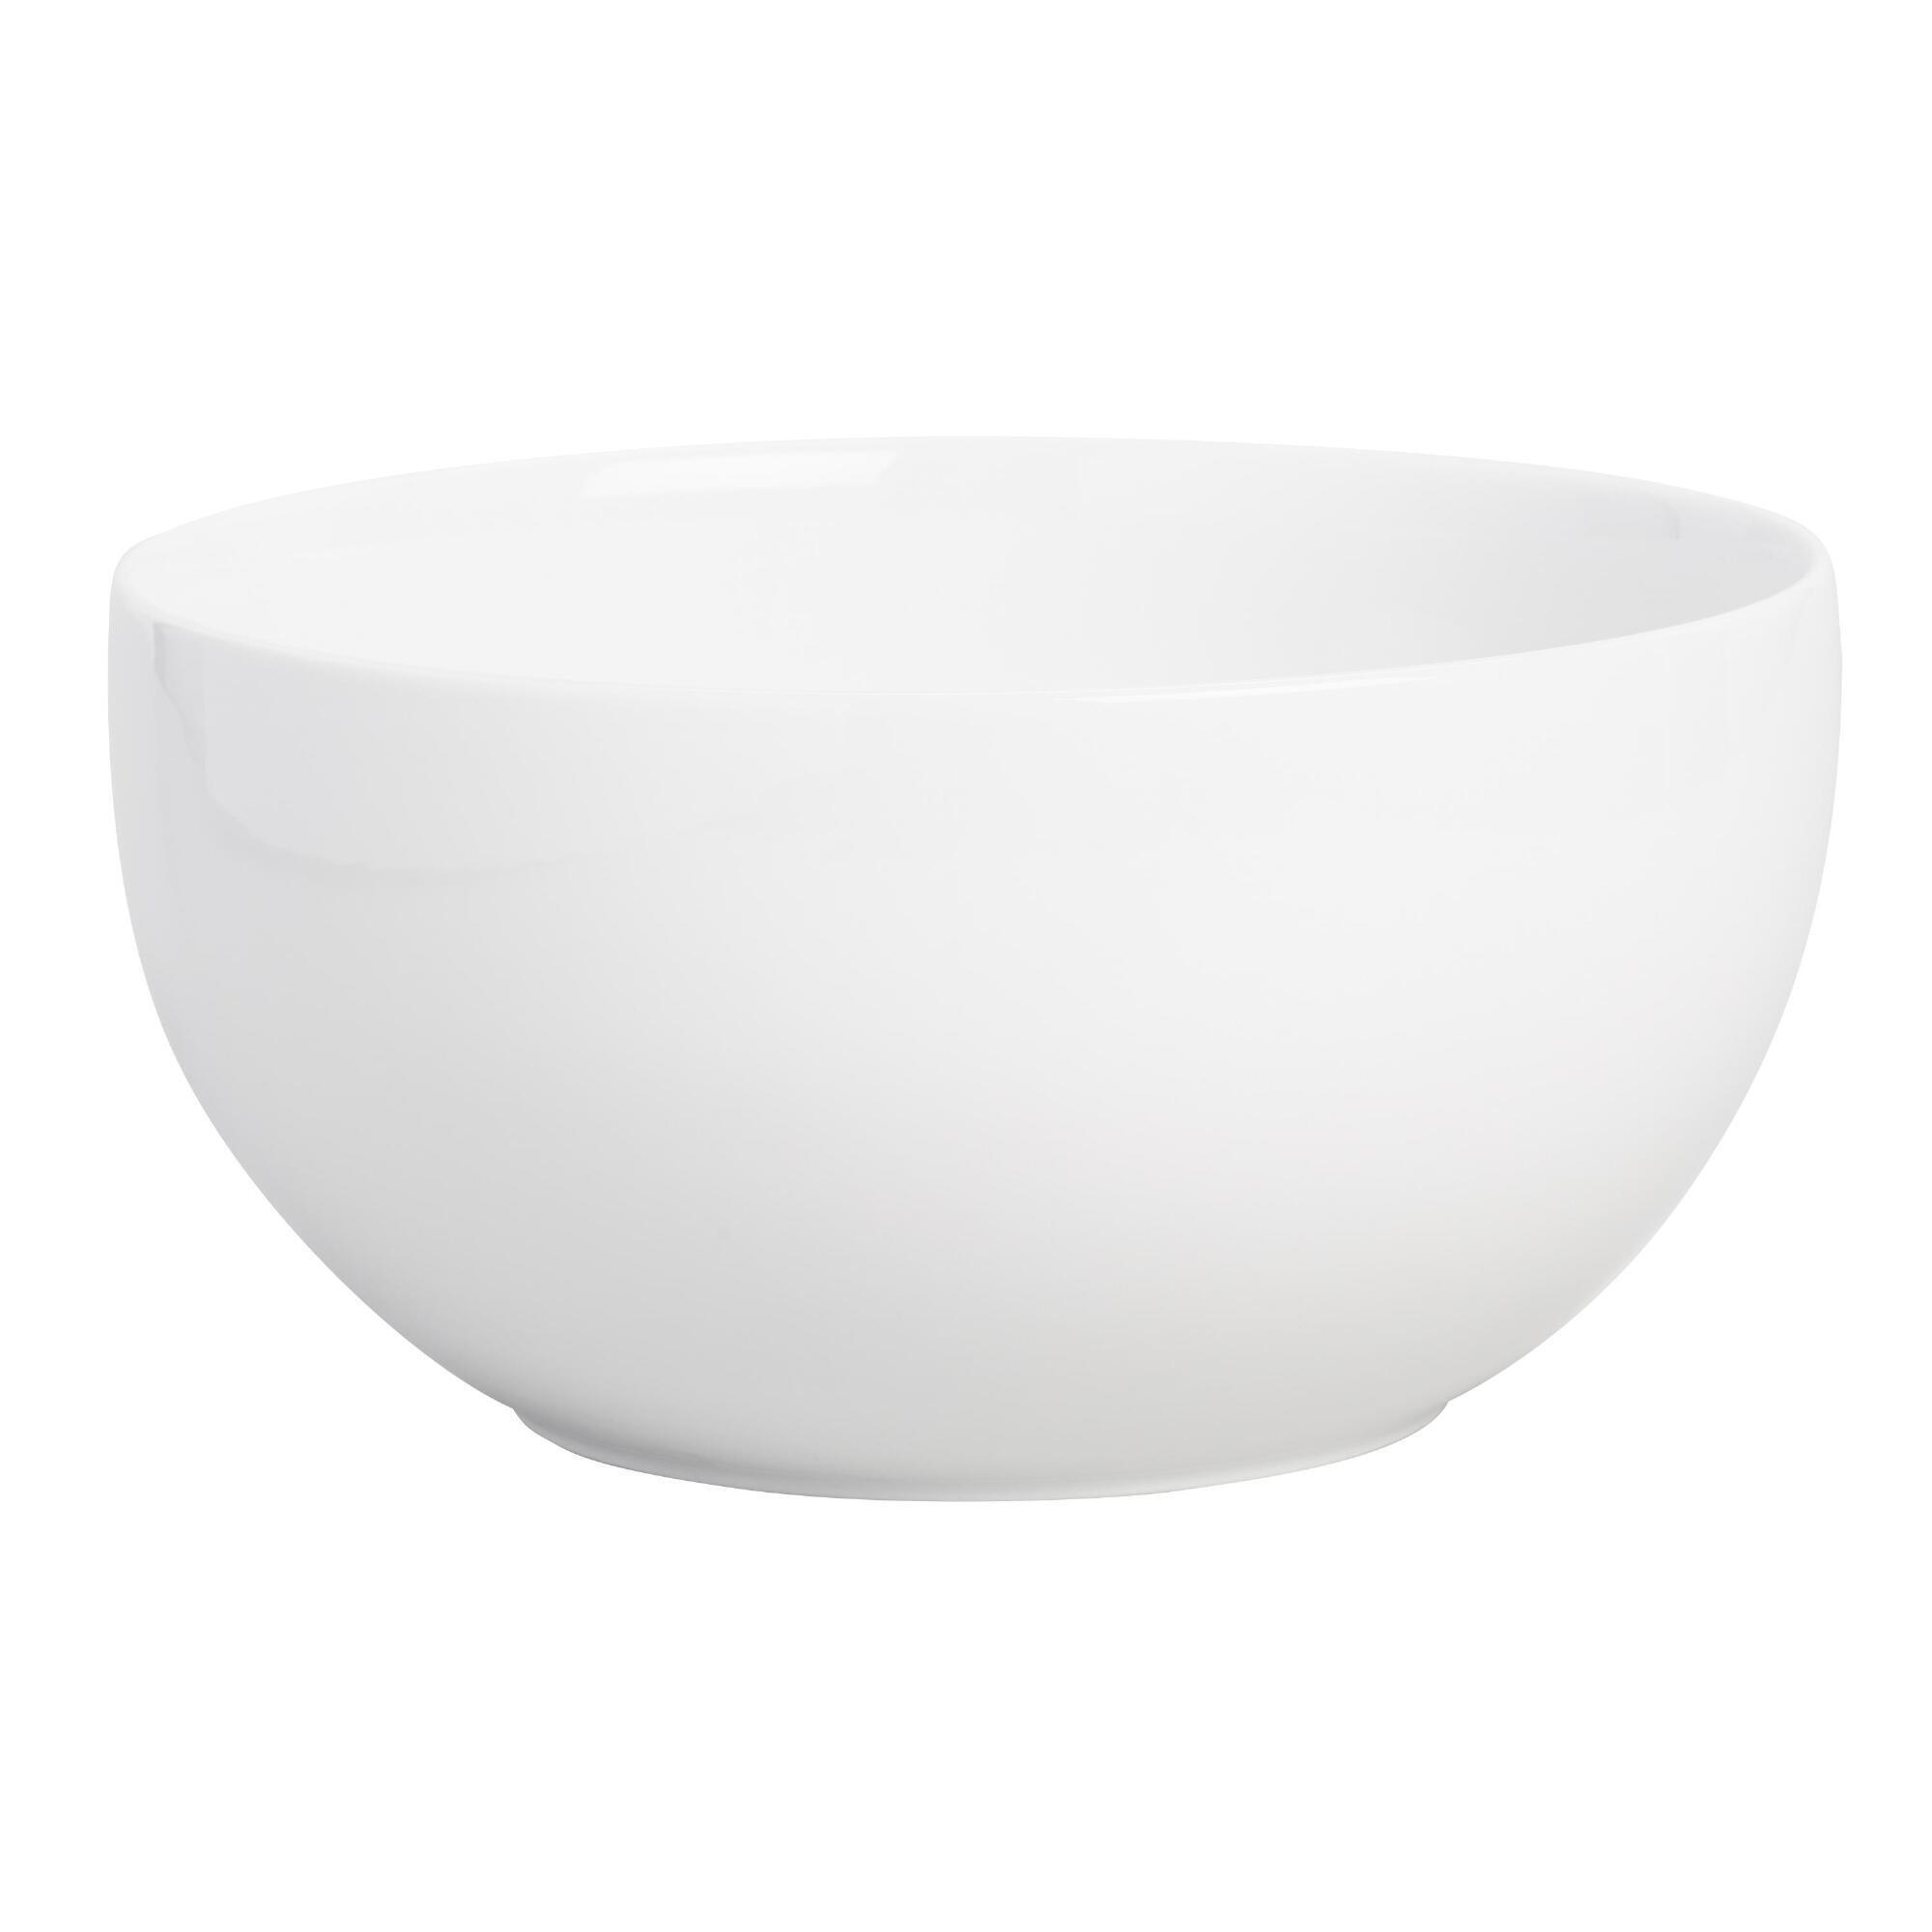 White Porcelain Coupe Serving Bowl by World Market